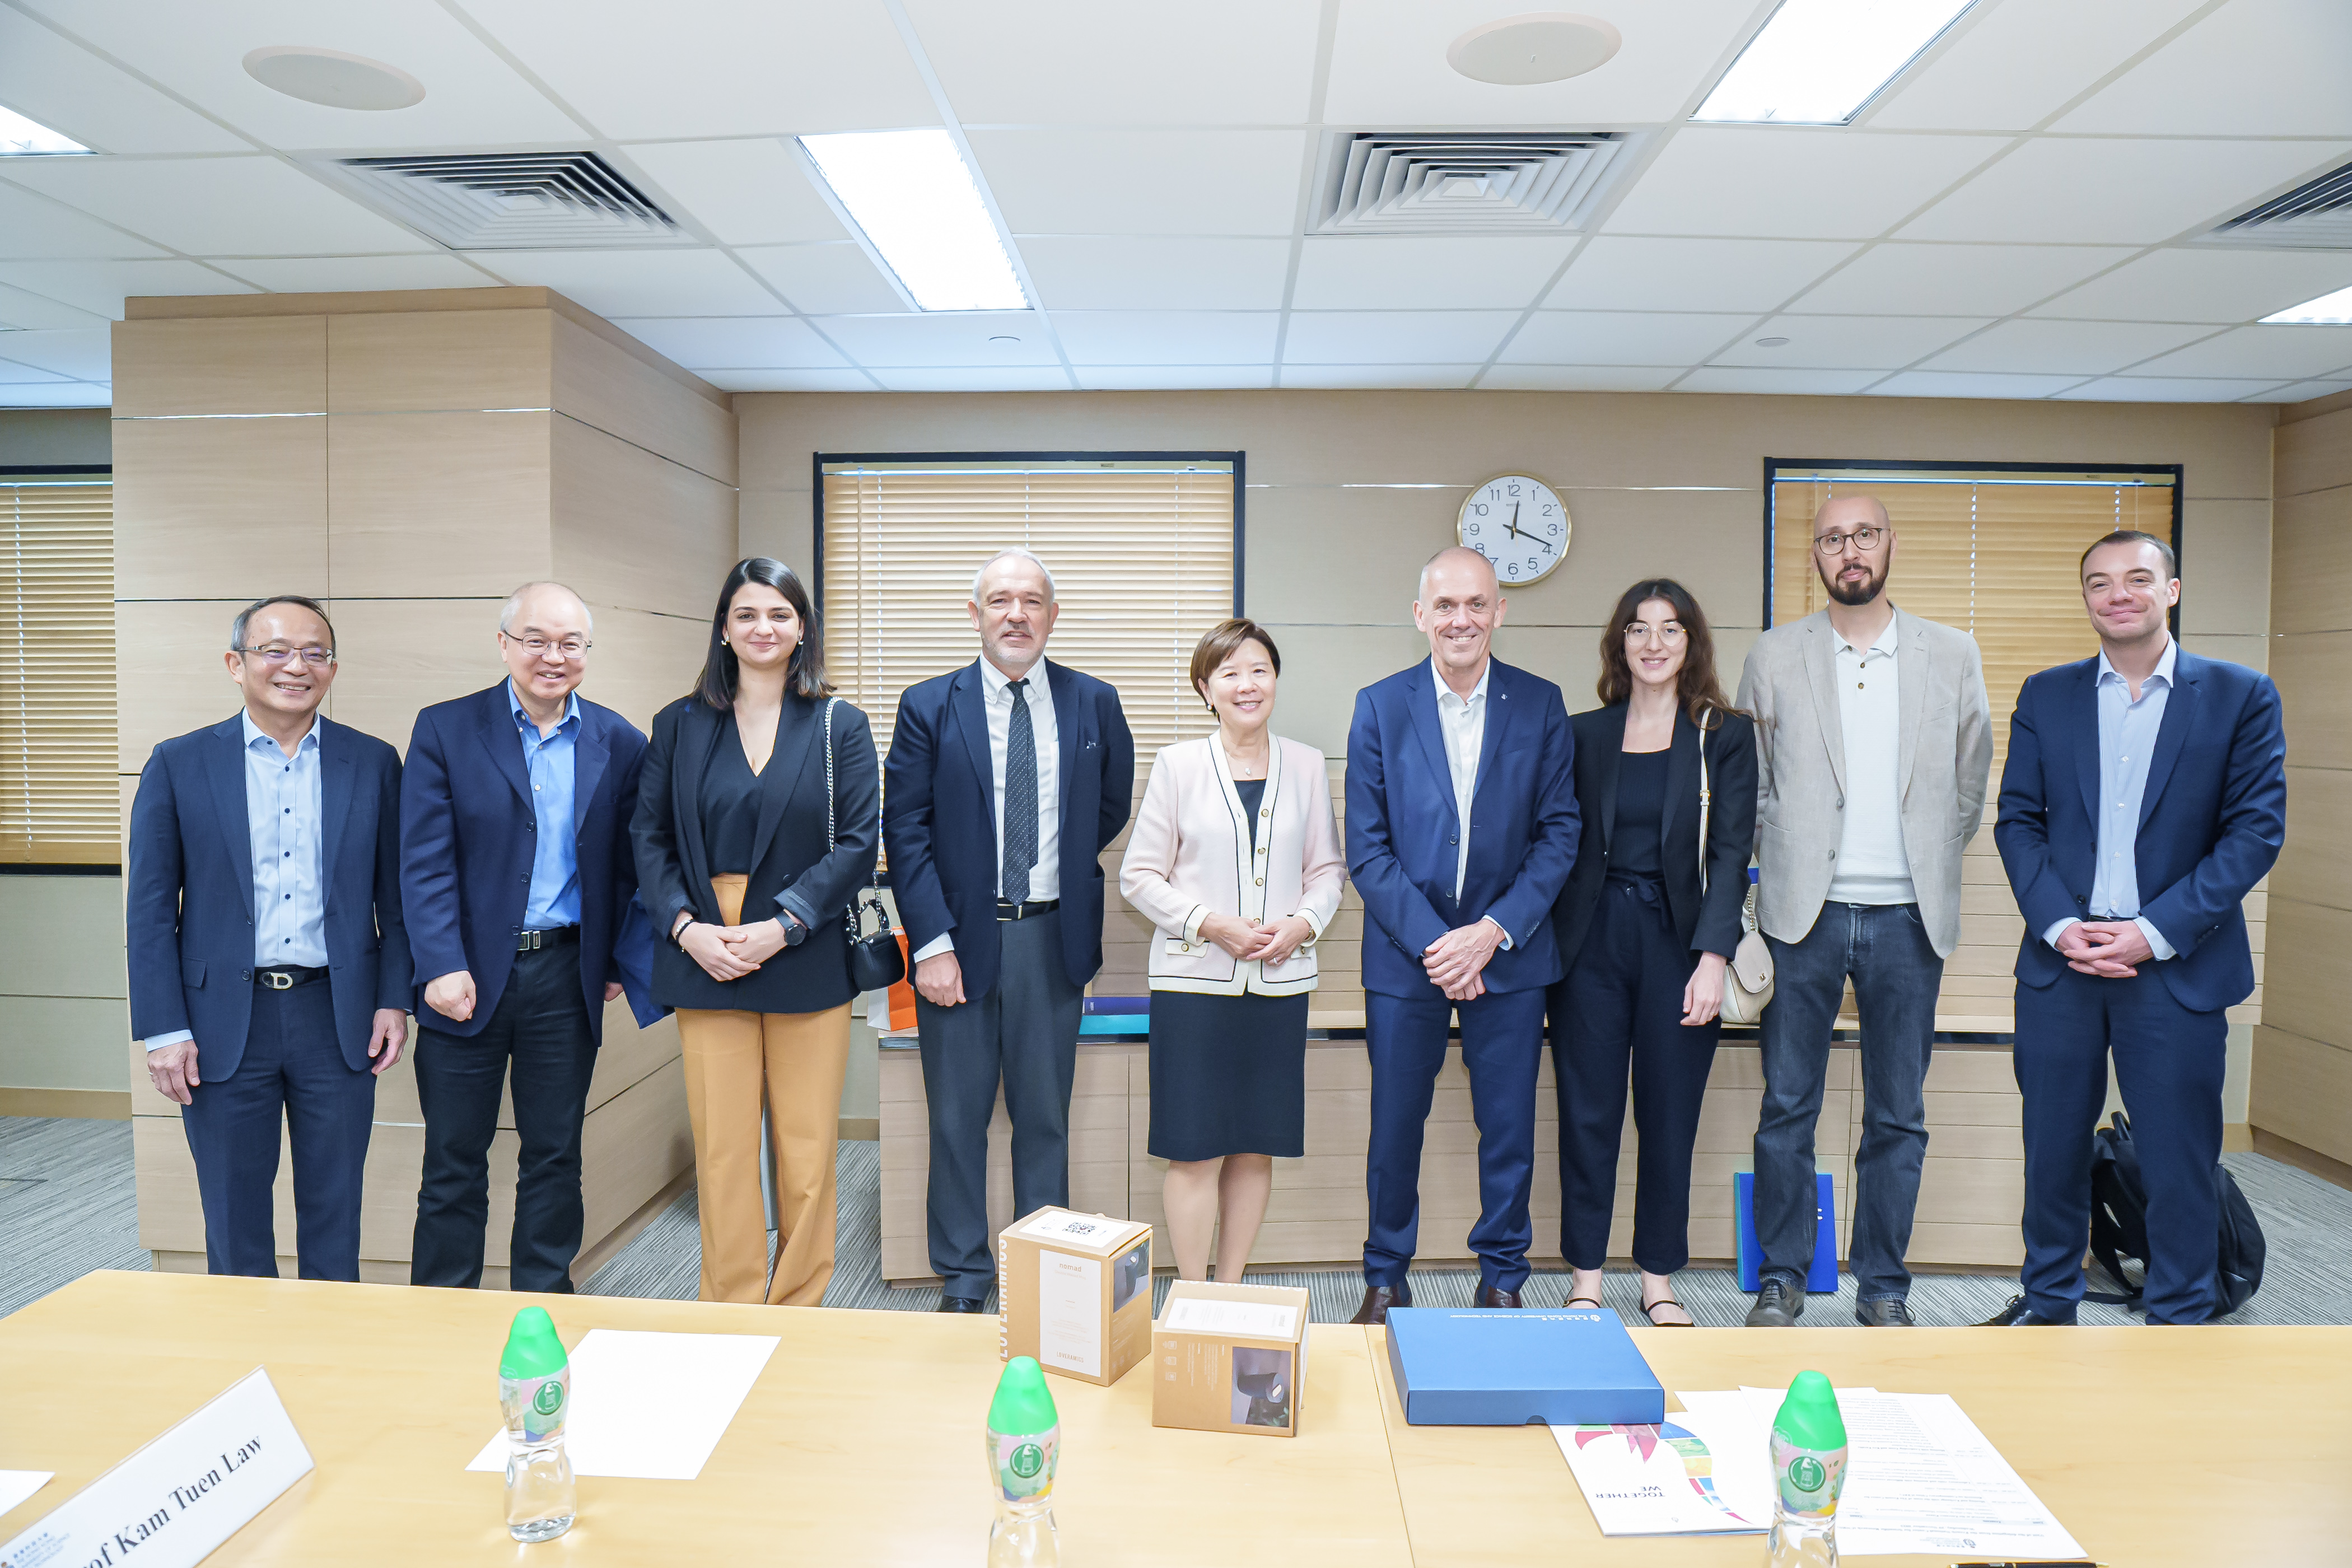 Delegation from the CNRS met with HKUST leadership team to understand HKUST’s strategic research focus and highlighted research endeavors.